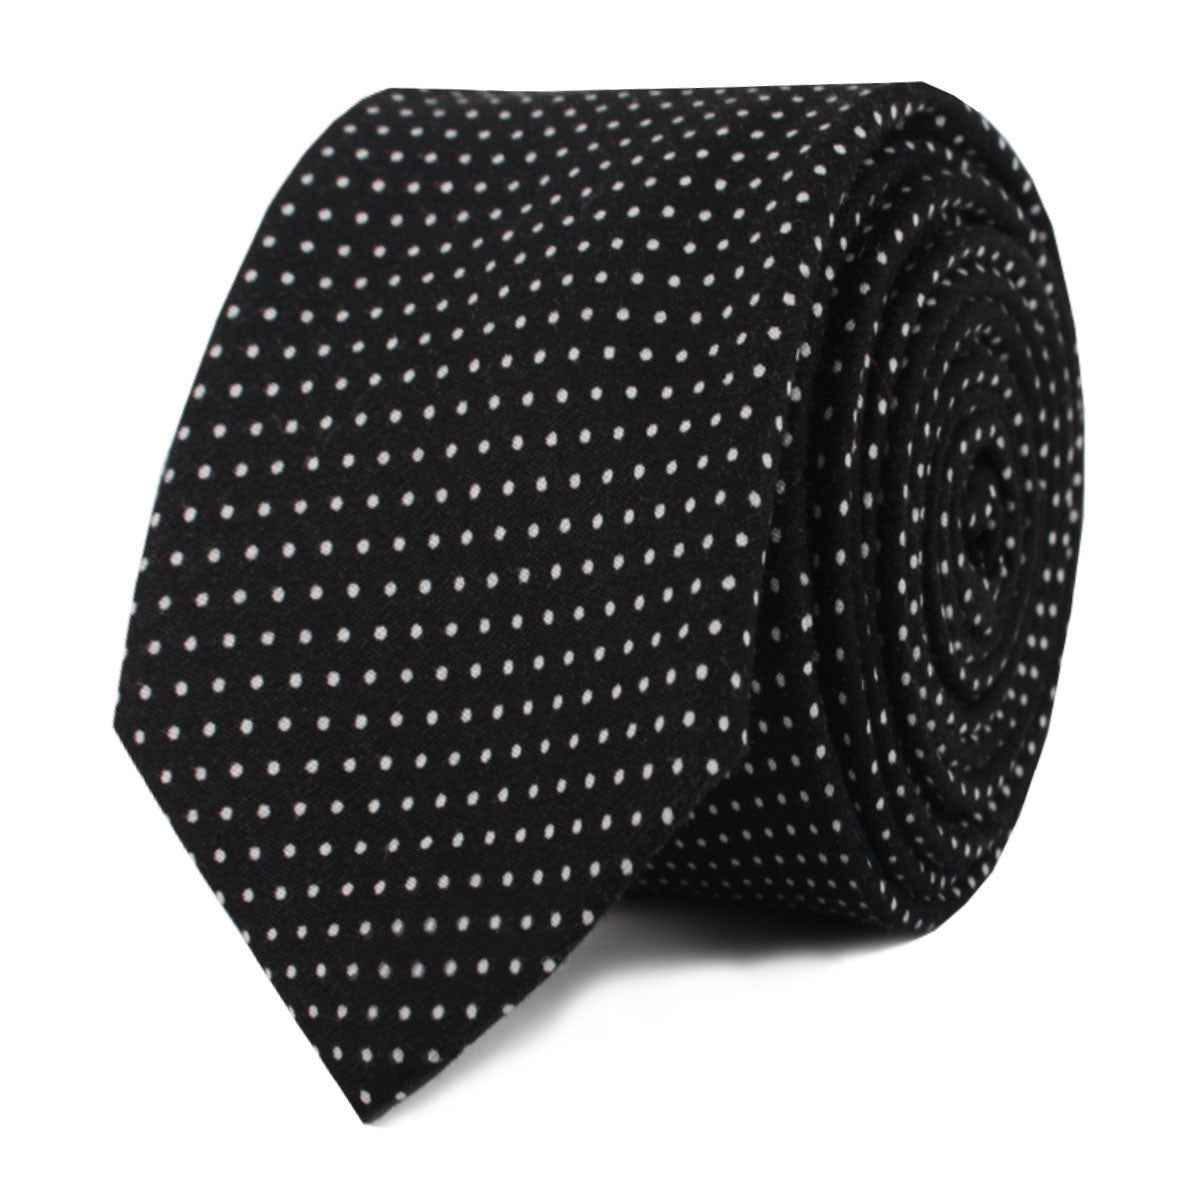 Black Cotton with Mini White Polka Dots Skinny Tie Front Roll